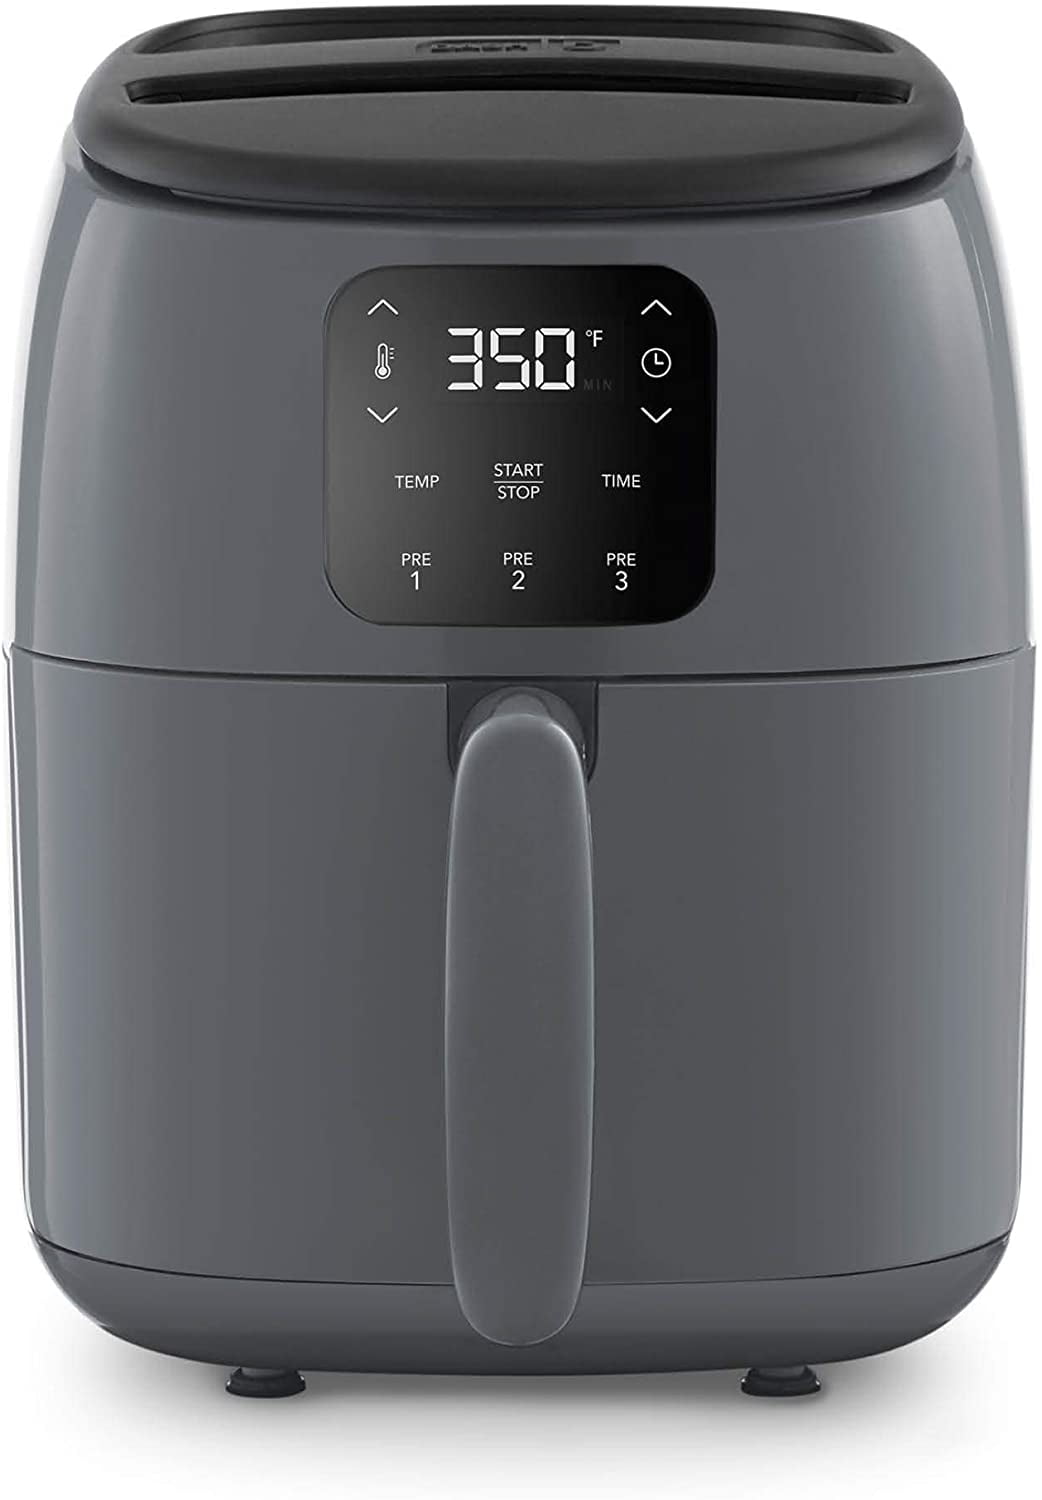 Temperature Control Auto Shut off & Timer LCD Digital Display Screen White Super Deal 3.7Quart Electric Air Fryer w/ 8 Cooking Presets